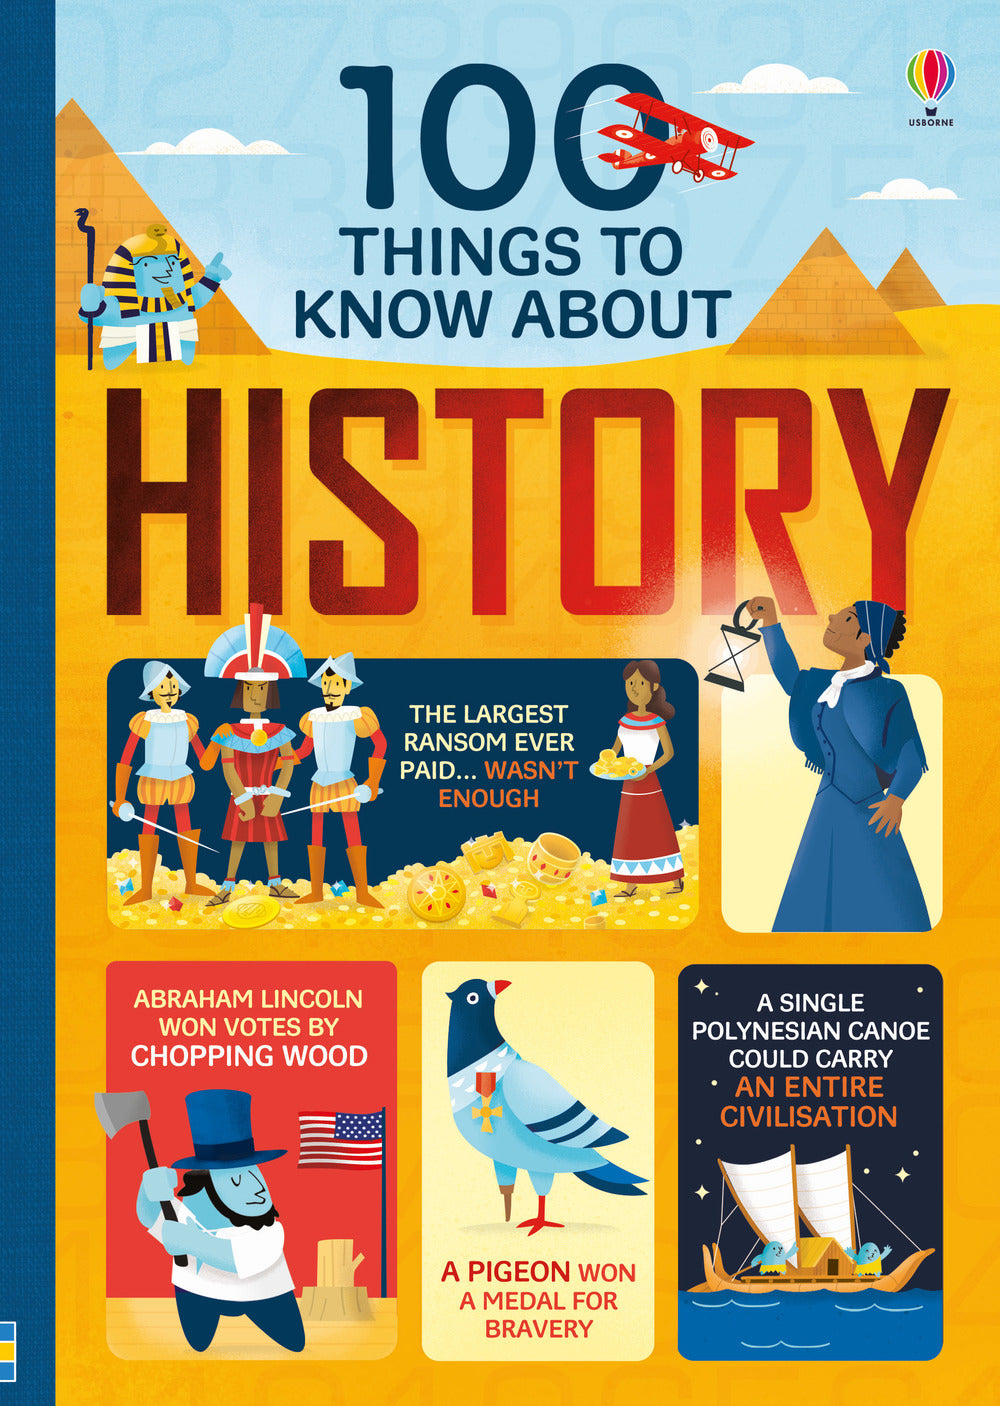 100 things to know about history.